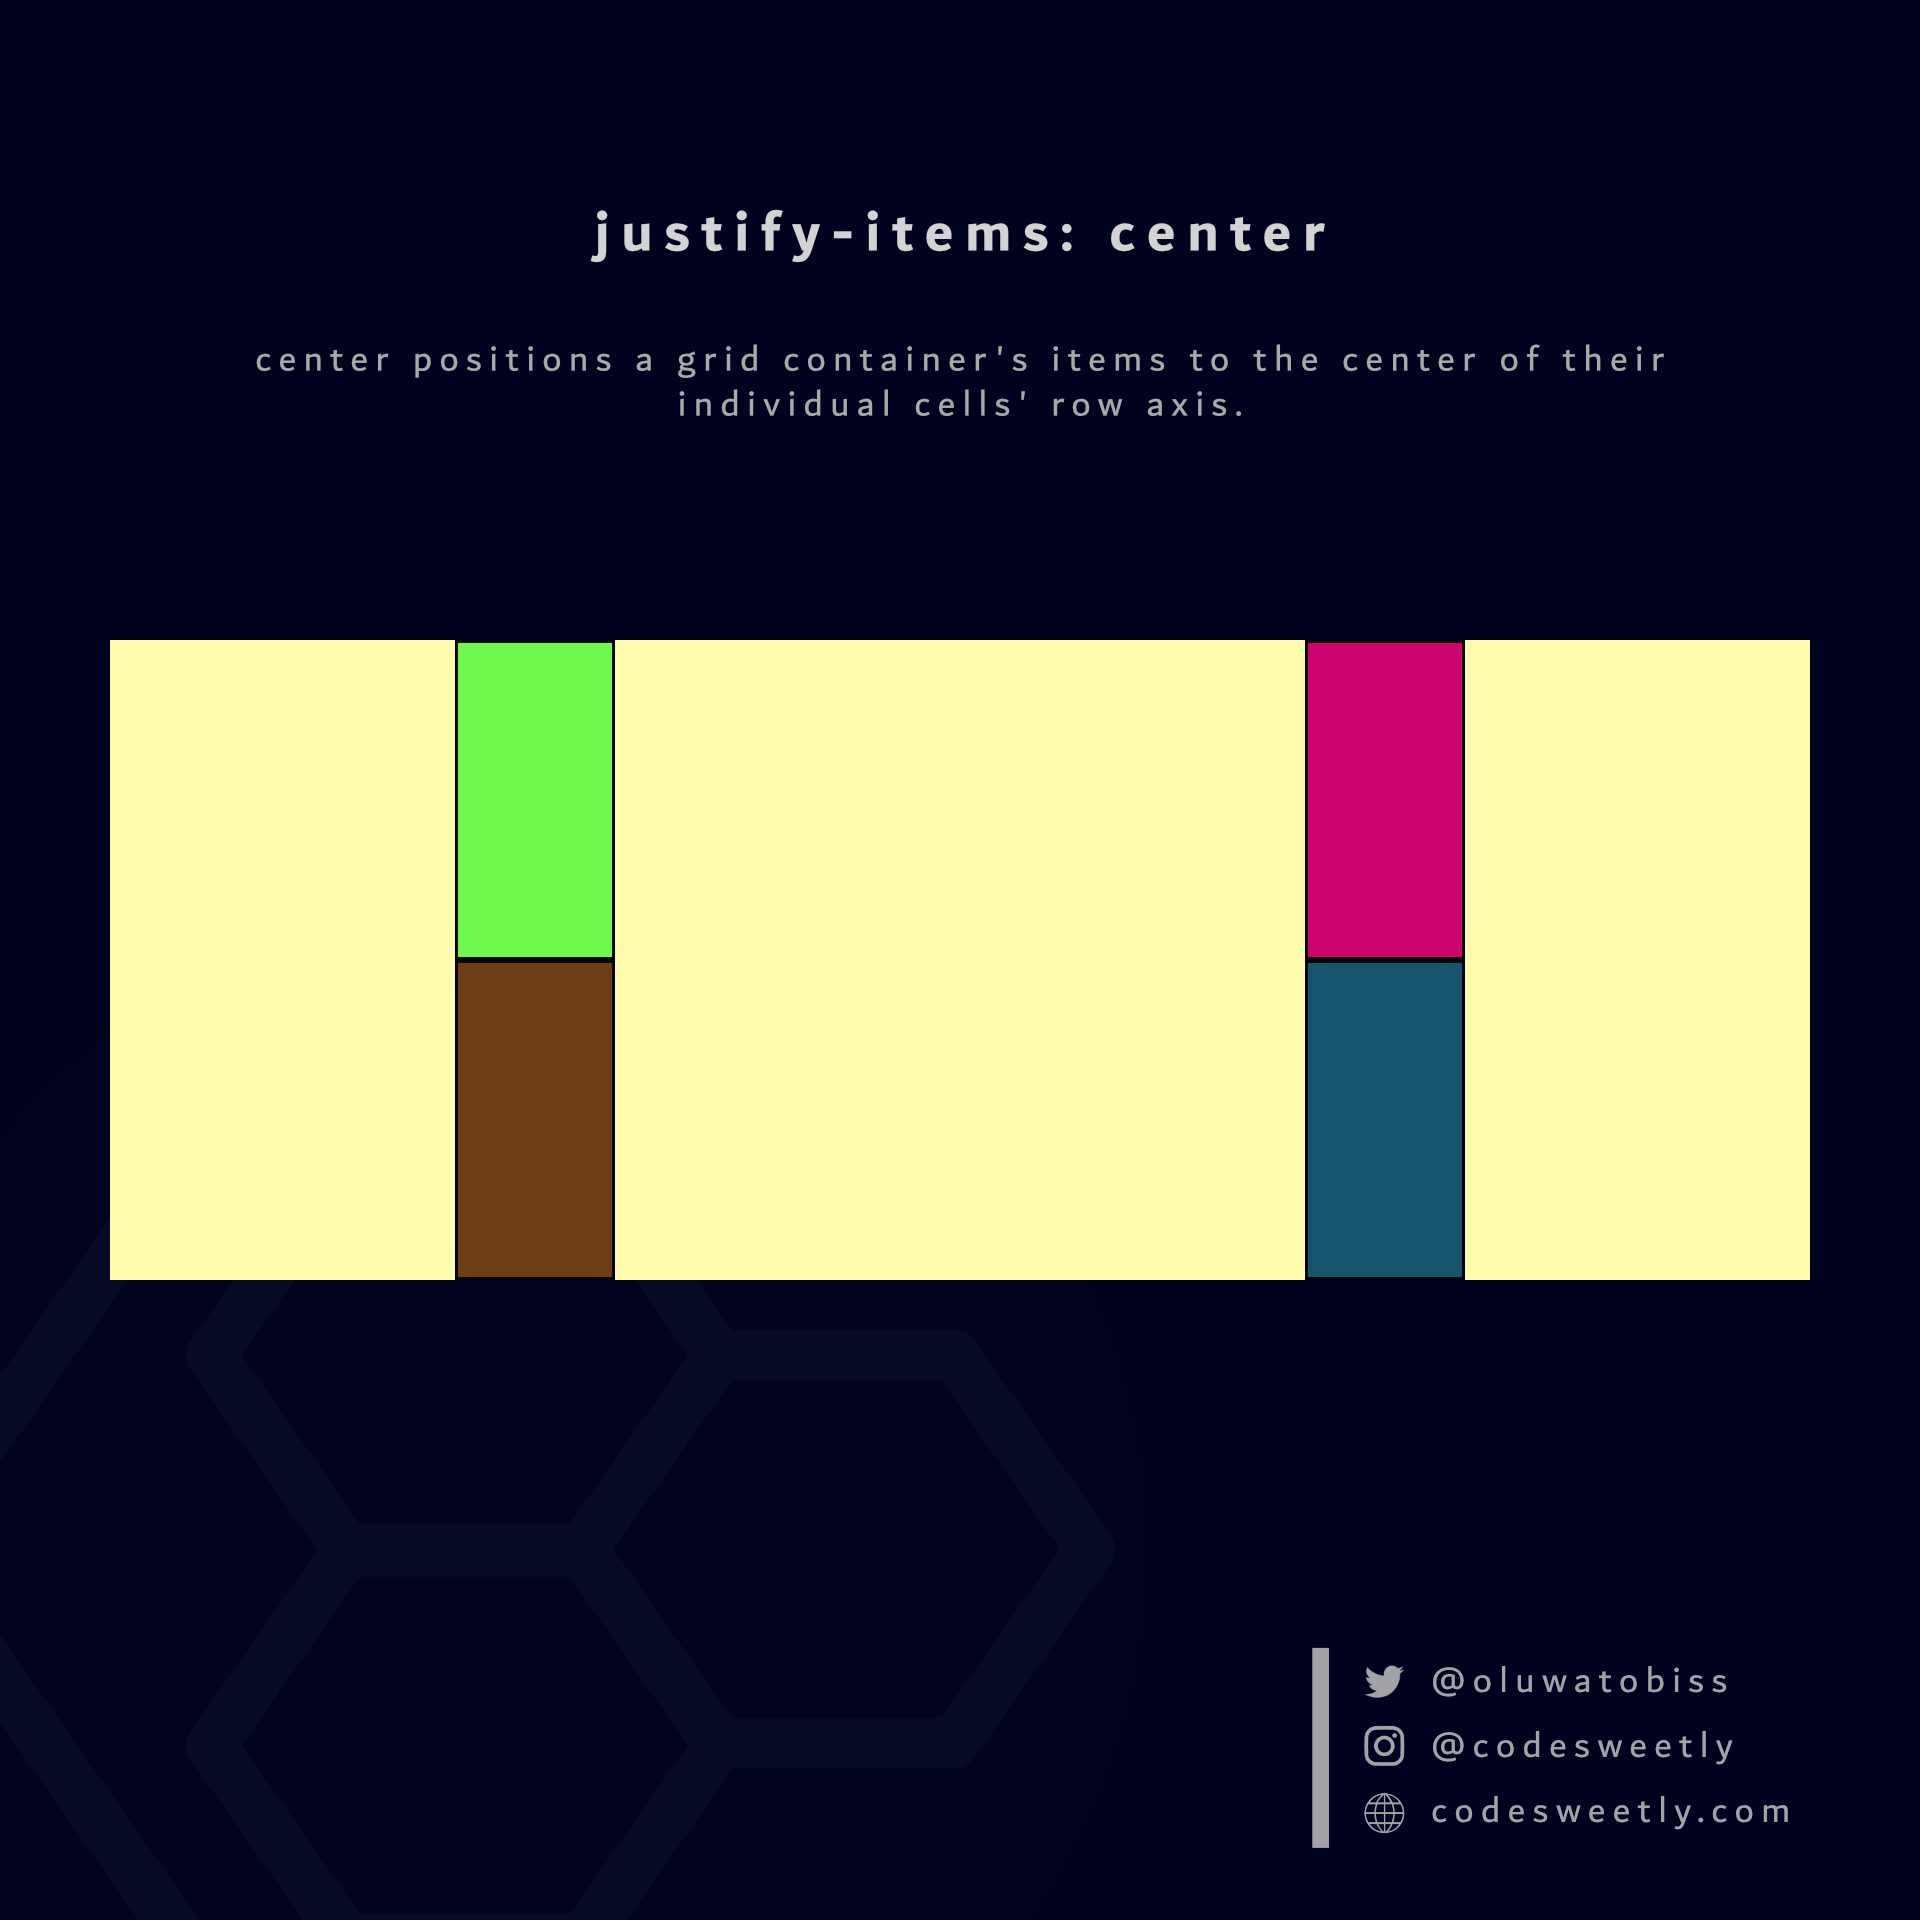 justify-items' center value positions grid items to their individual cells' center